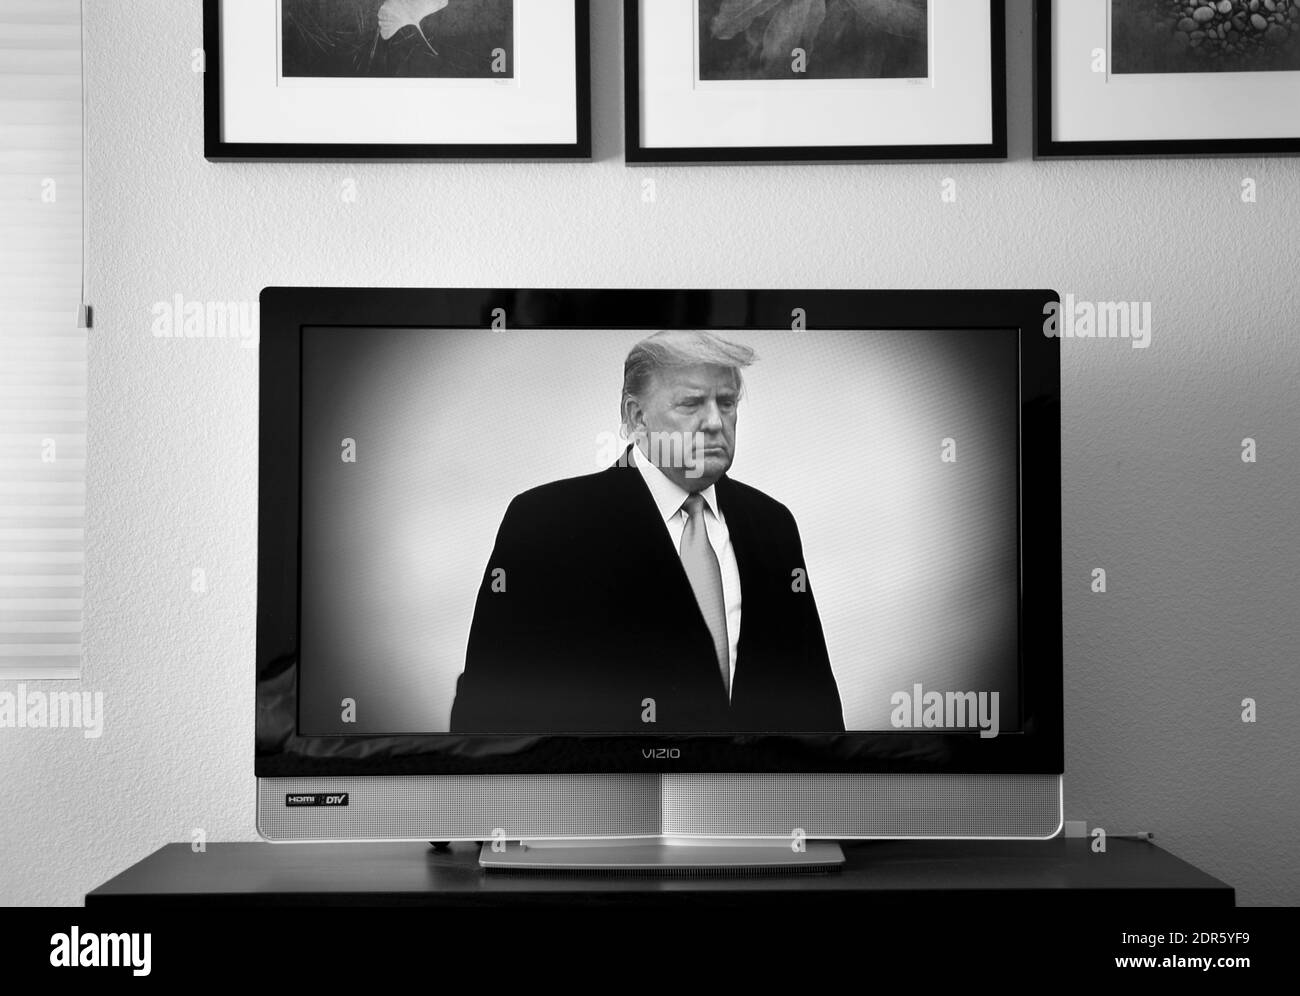 U.S. President Donald Trump appears on a television set tuned into a PBS broadcast. Stock Photo